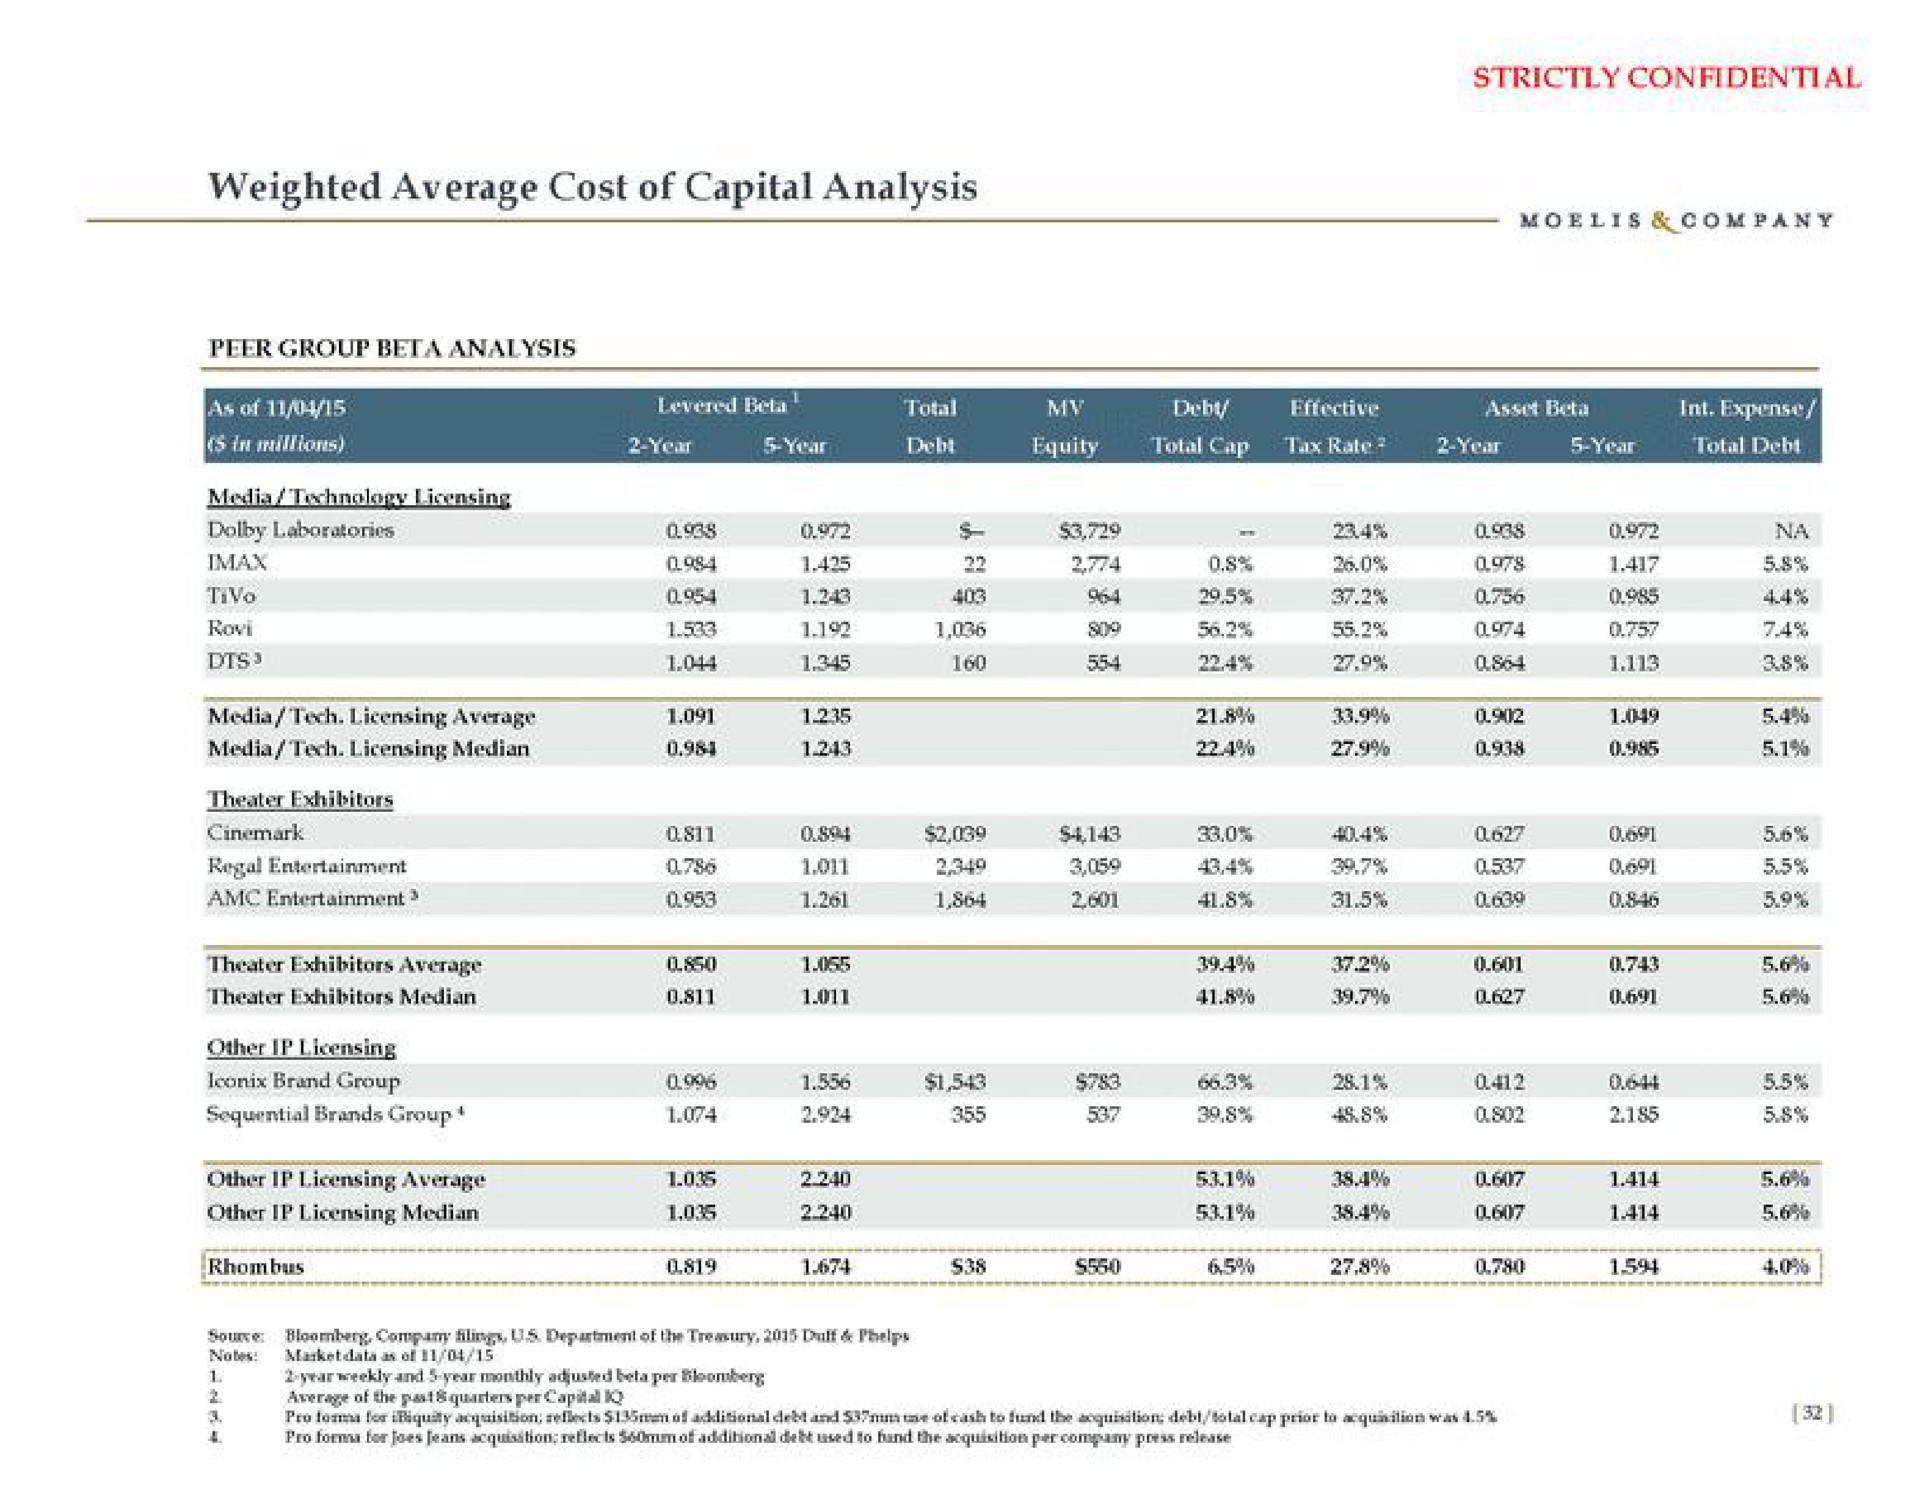 weighted average cost of capital analysis other licensing average a i so | Moelis & Company